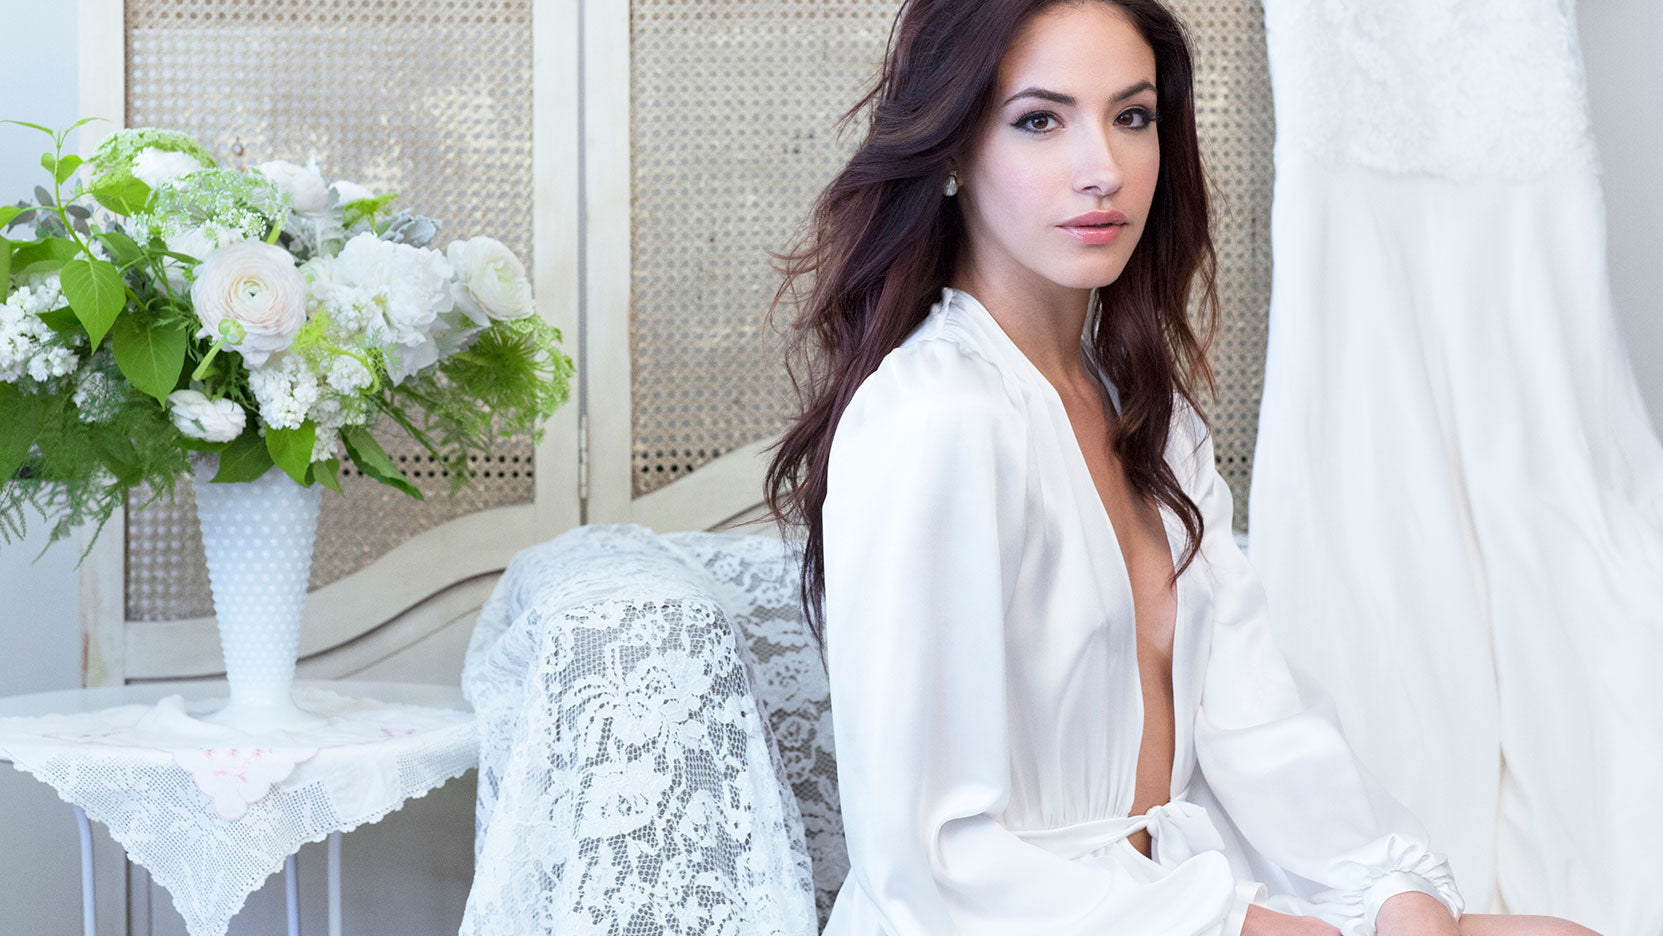 White silk dressing gown and robes for brides on their wedding day